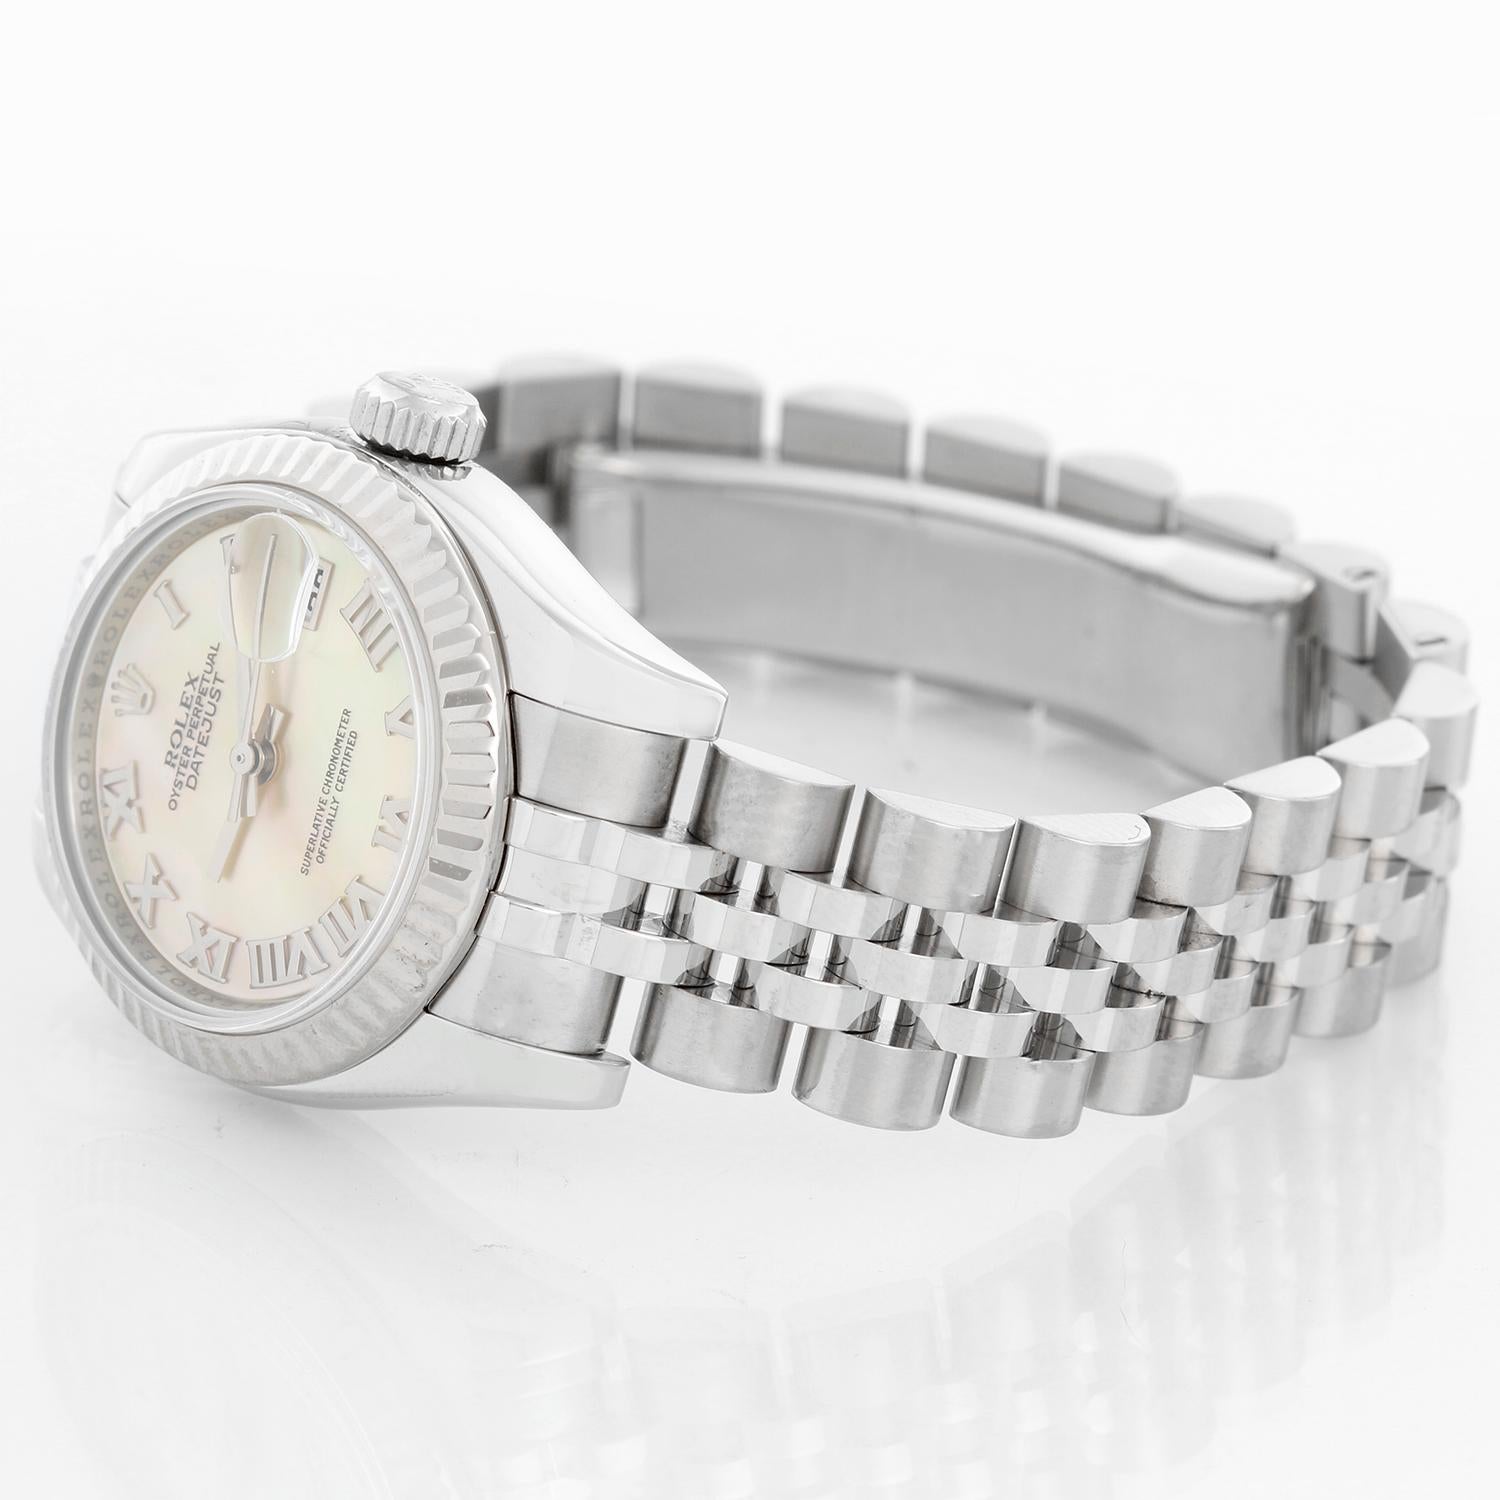 Rolex Lady Datejust Stainless Steel Ladies Watch 179174 - Automatic winding; 31 jewel; sapphire crystal. Stainless steel case with 18k white gold fluted bezel (26mm diameter). Factory Mother of Pearl . Stainless steel hidden-clasp Jubilee bracelet.